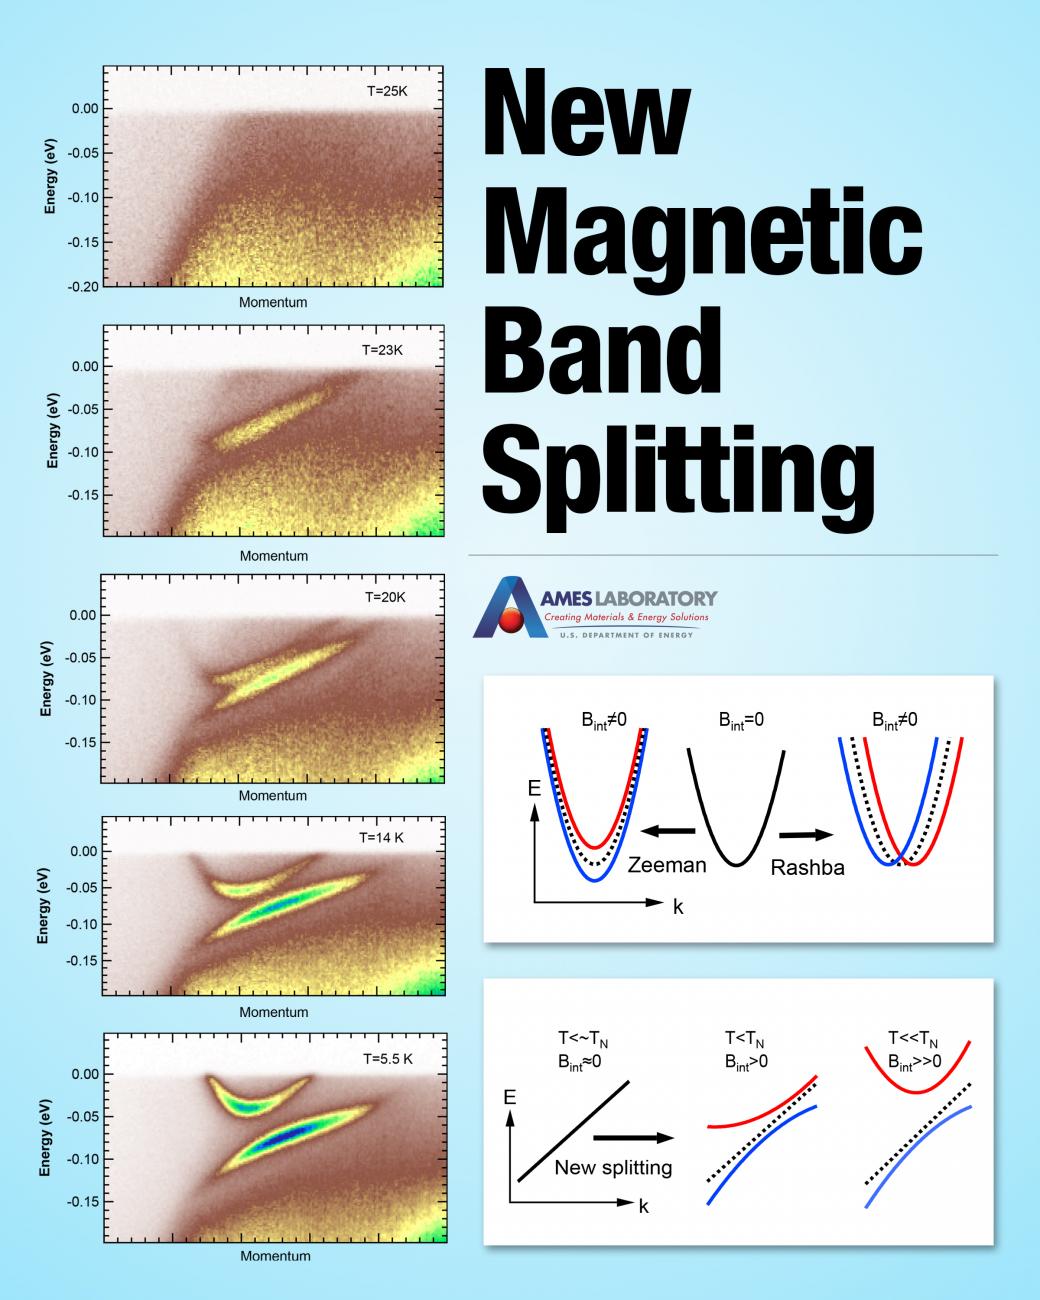 New magnetic band splitting explained with visuals.